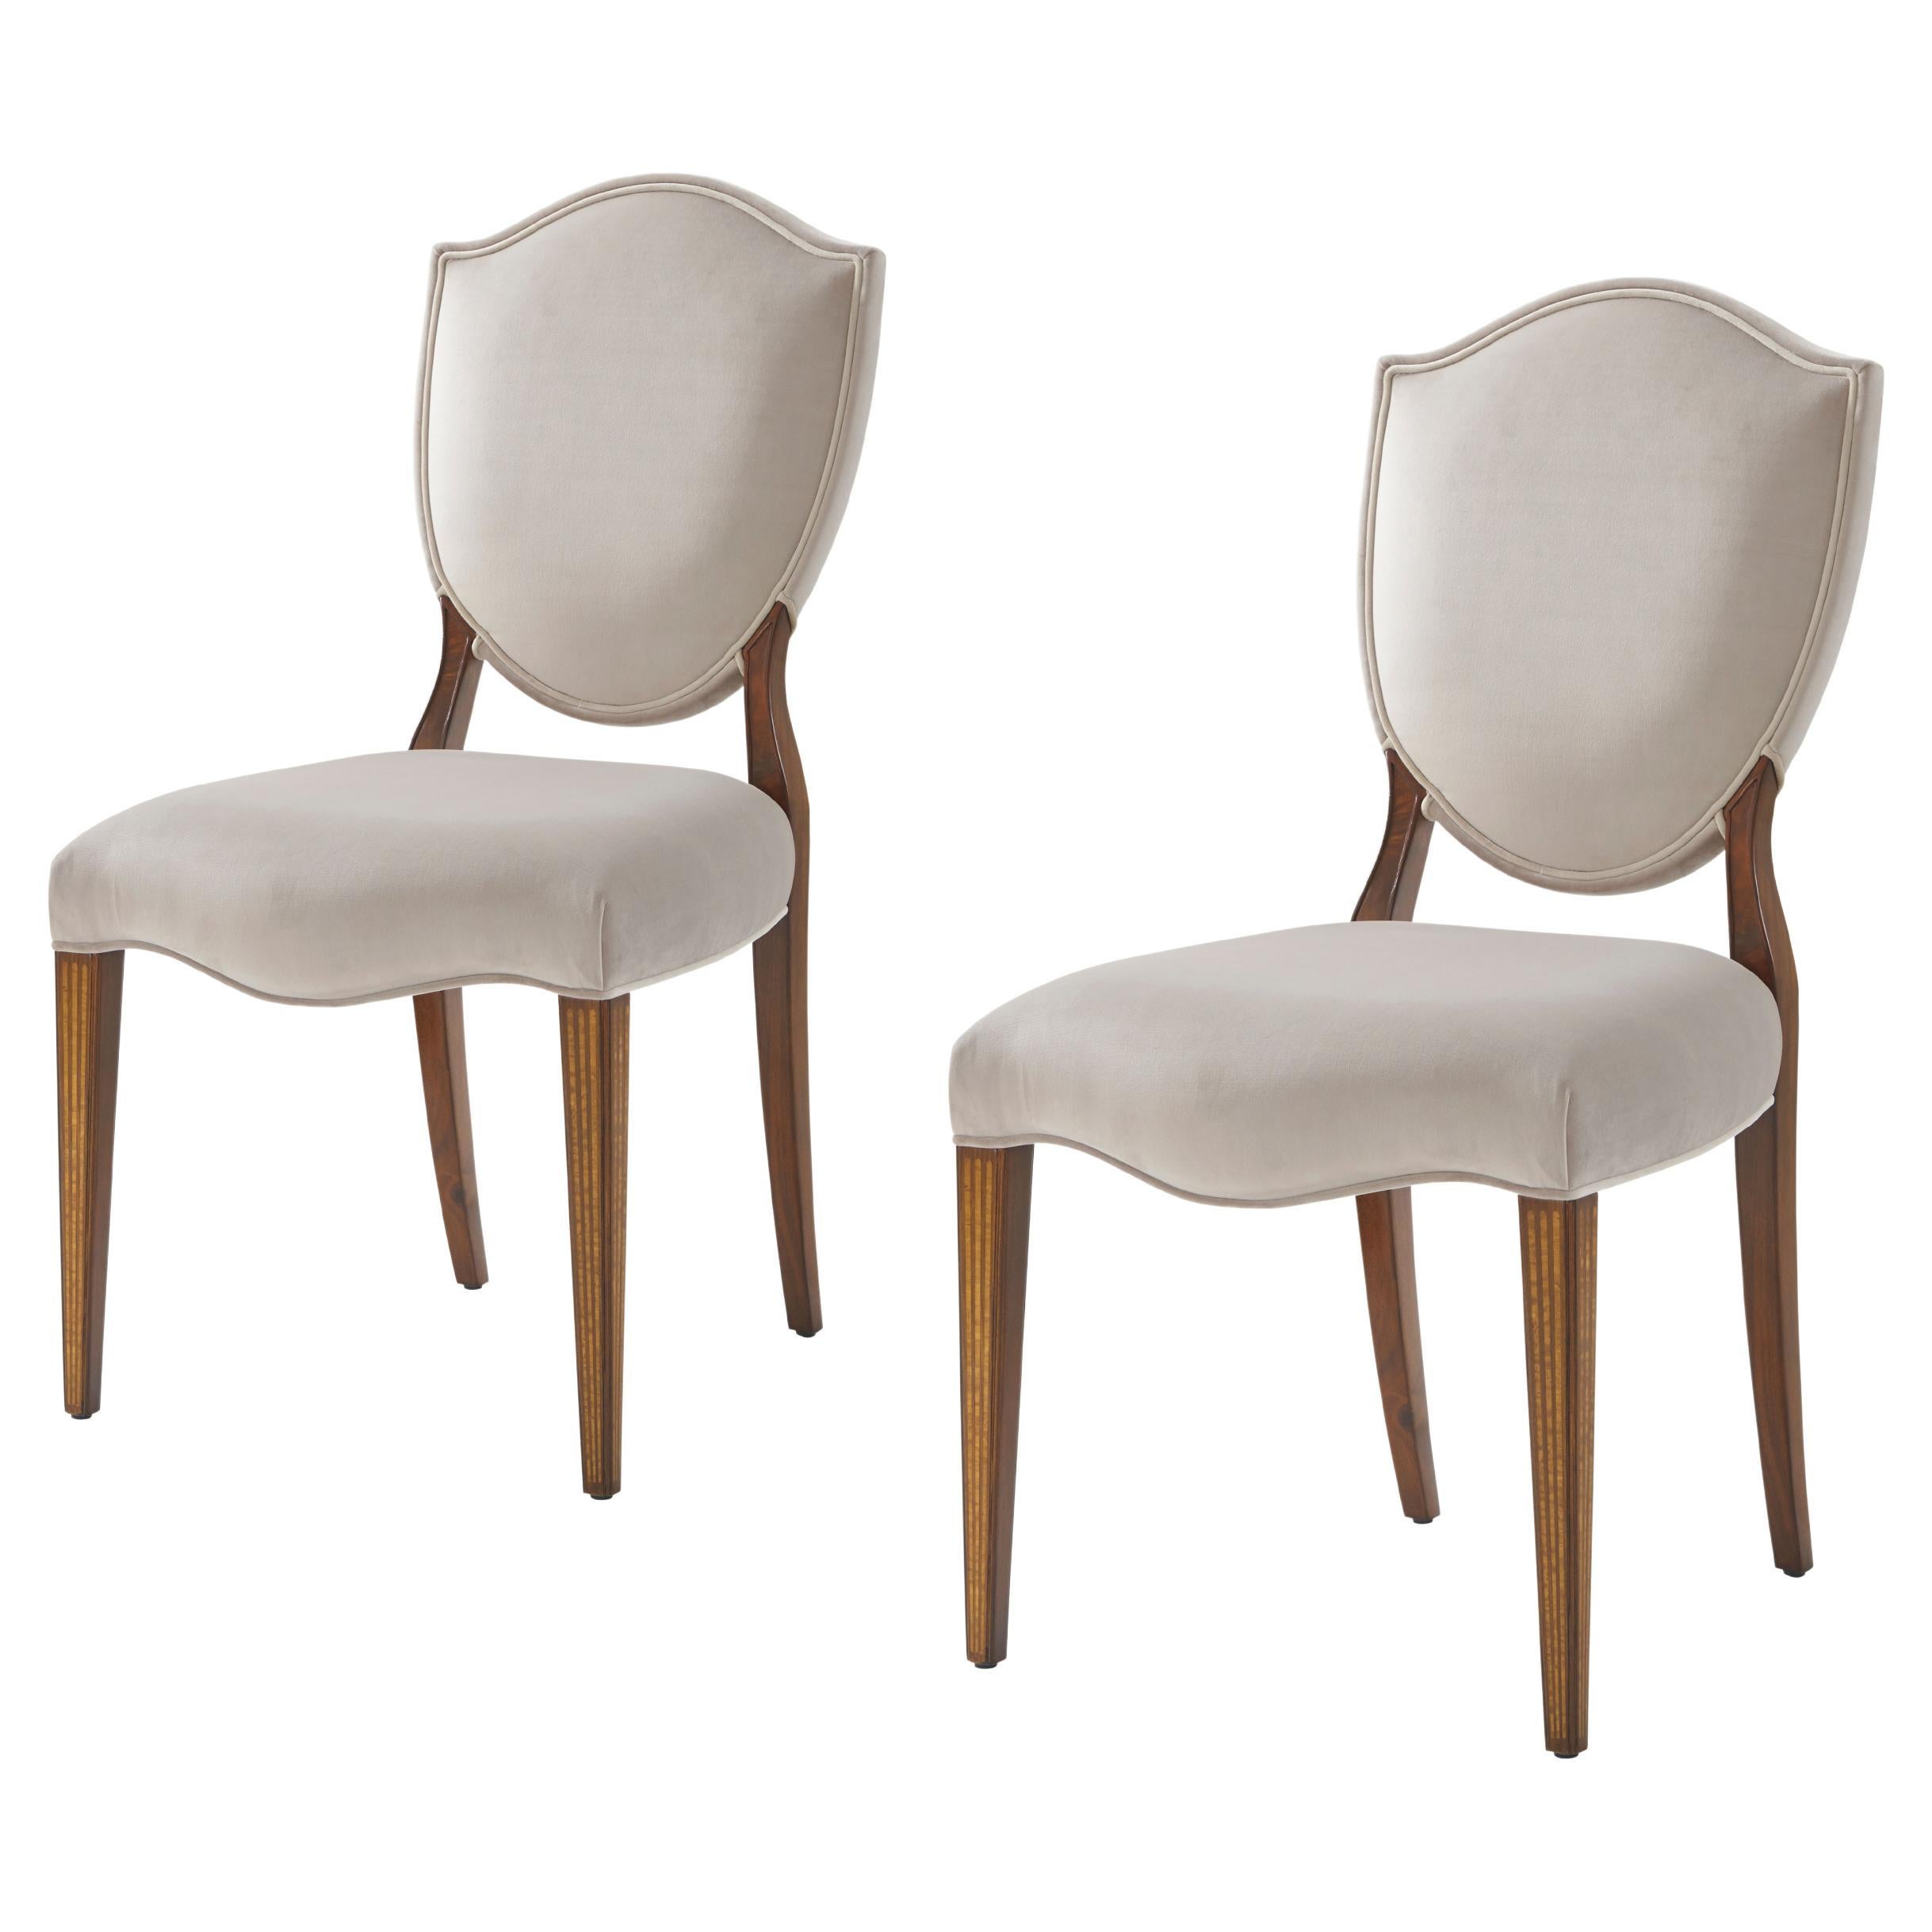 What type of fabric is best for dining chairs?